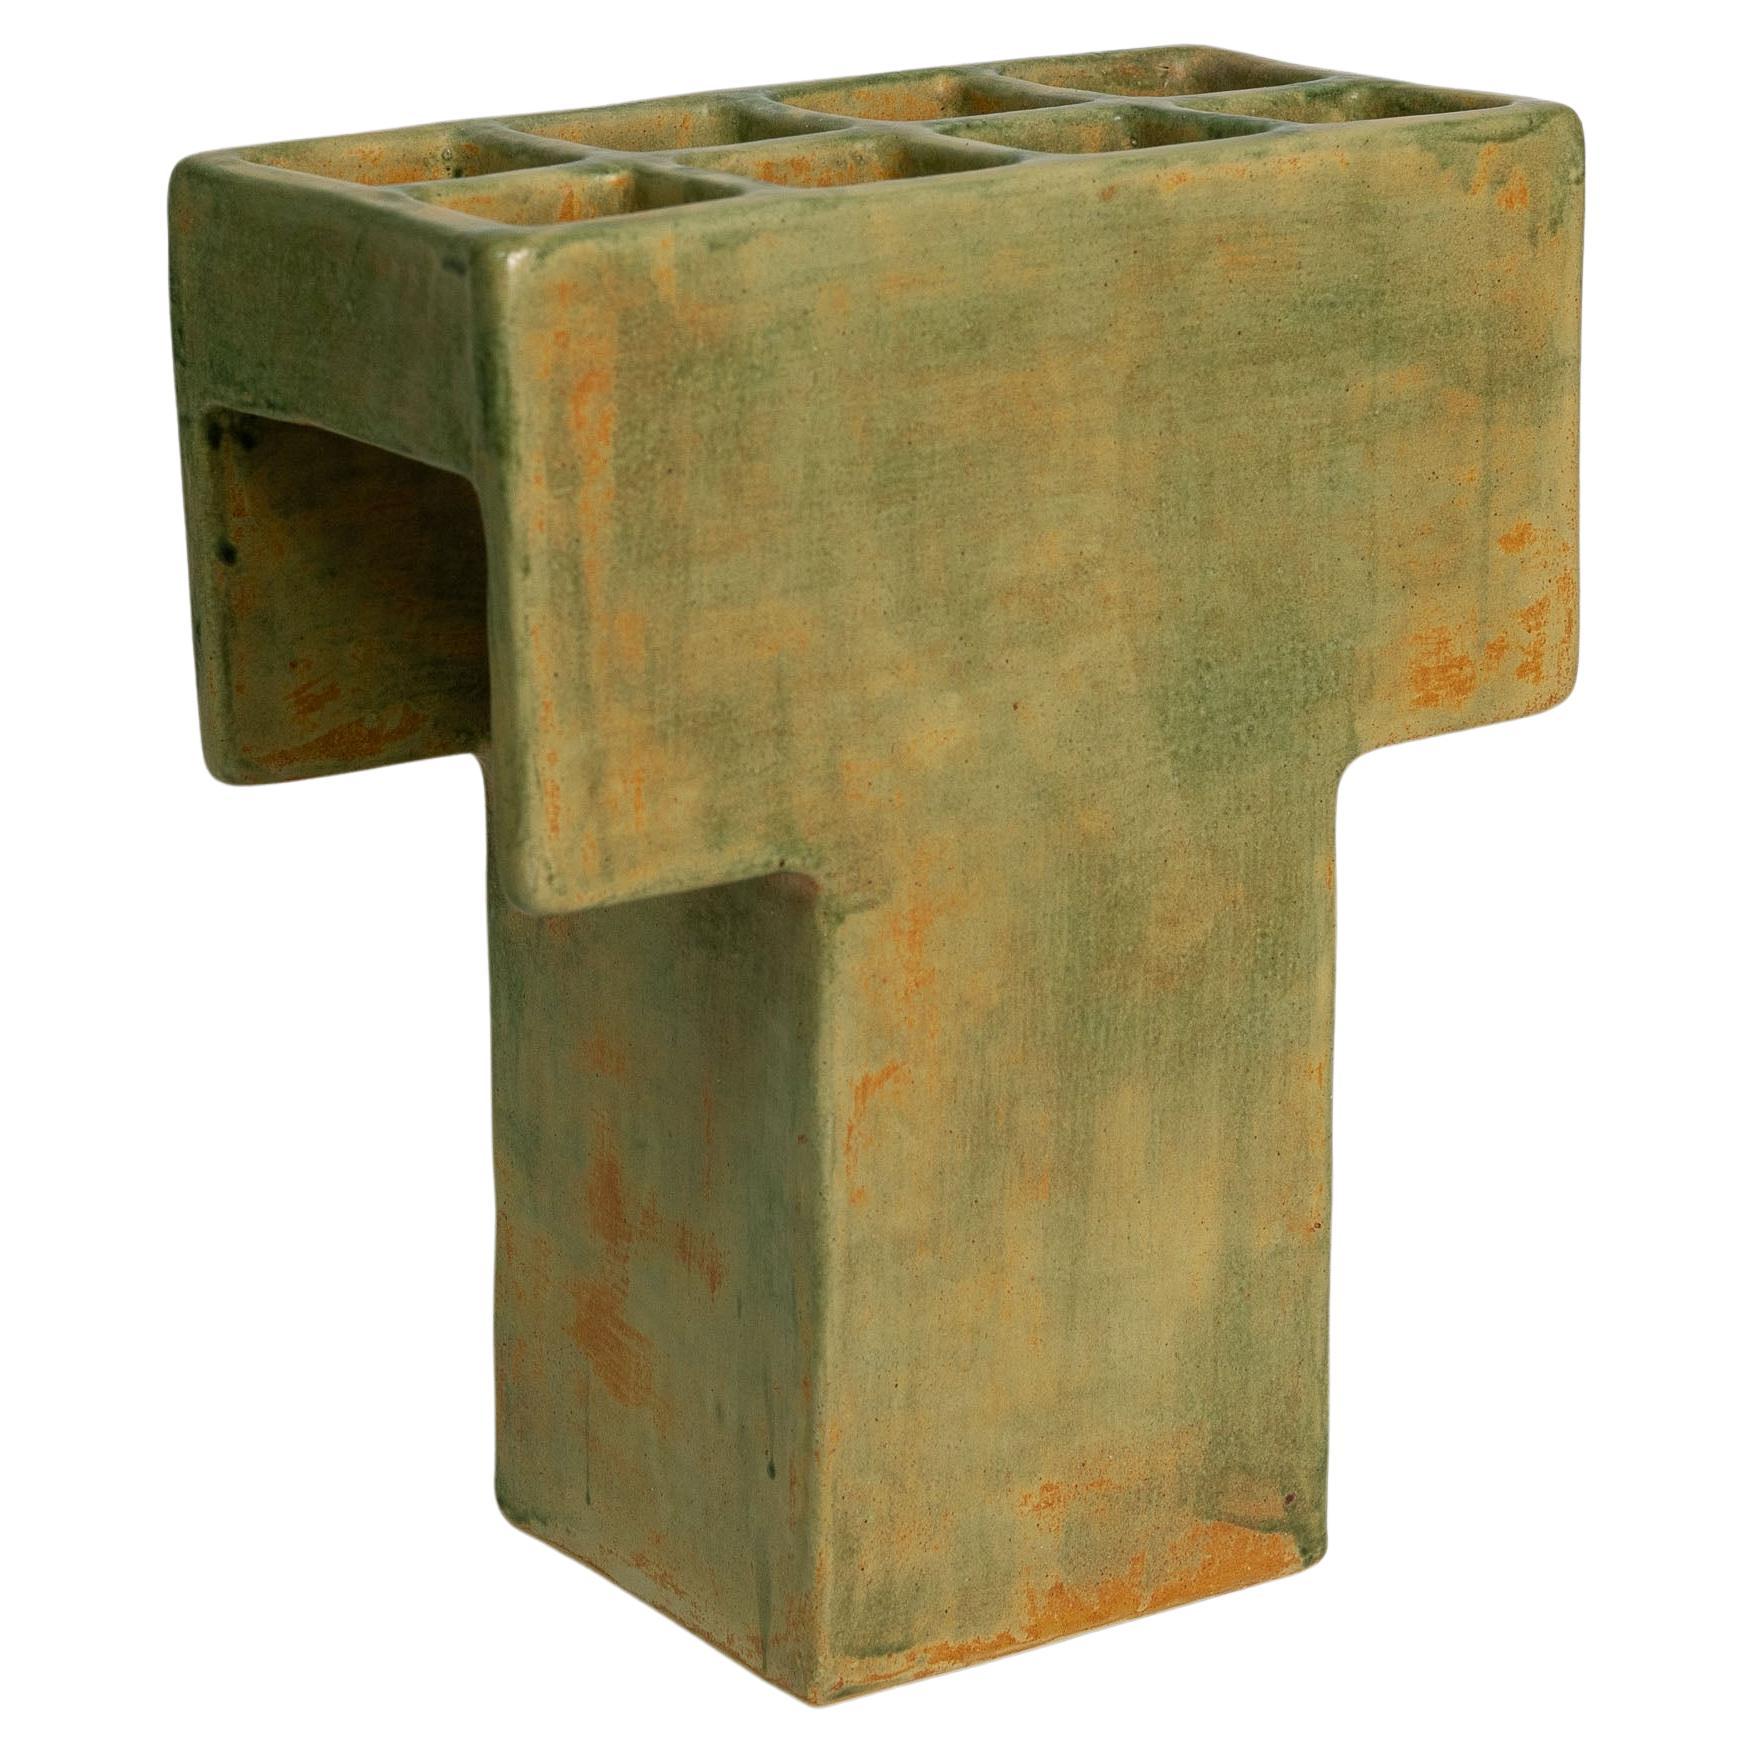 Mr. T Ceramic Table Lamp, Geometric, Brutalist, Square Table Light, Clay, Glazed For Sale